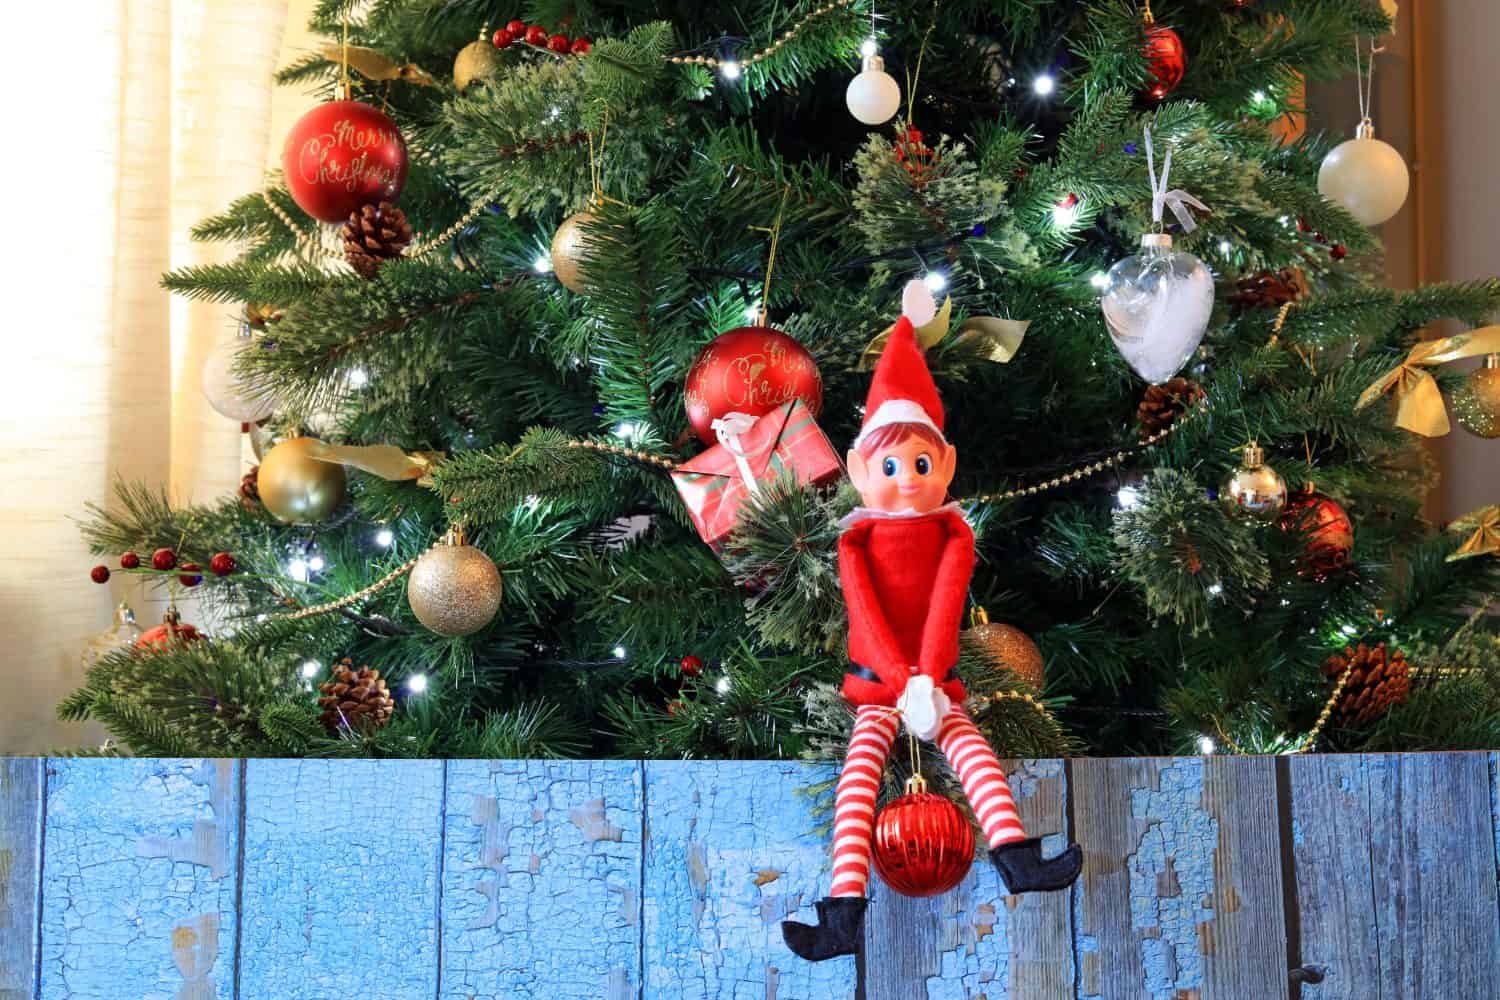 Mischievous Elf On The Shelf Sat On A Christmas Tree Branch Holding A Bauble.